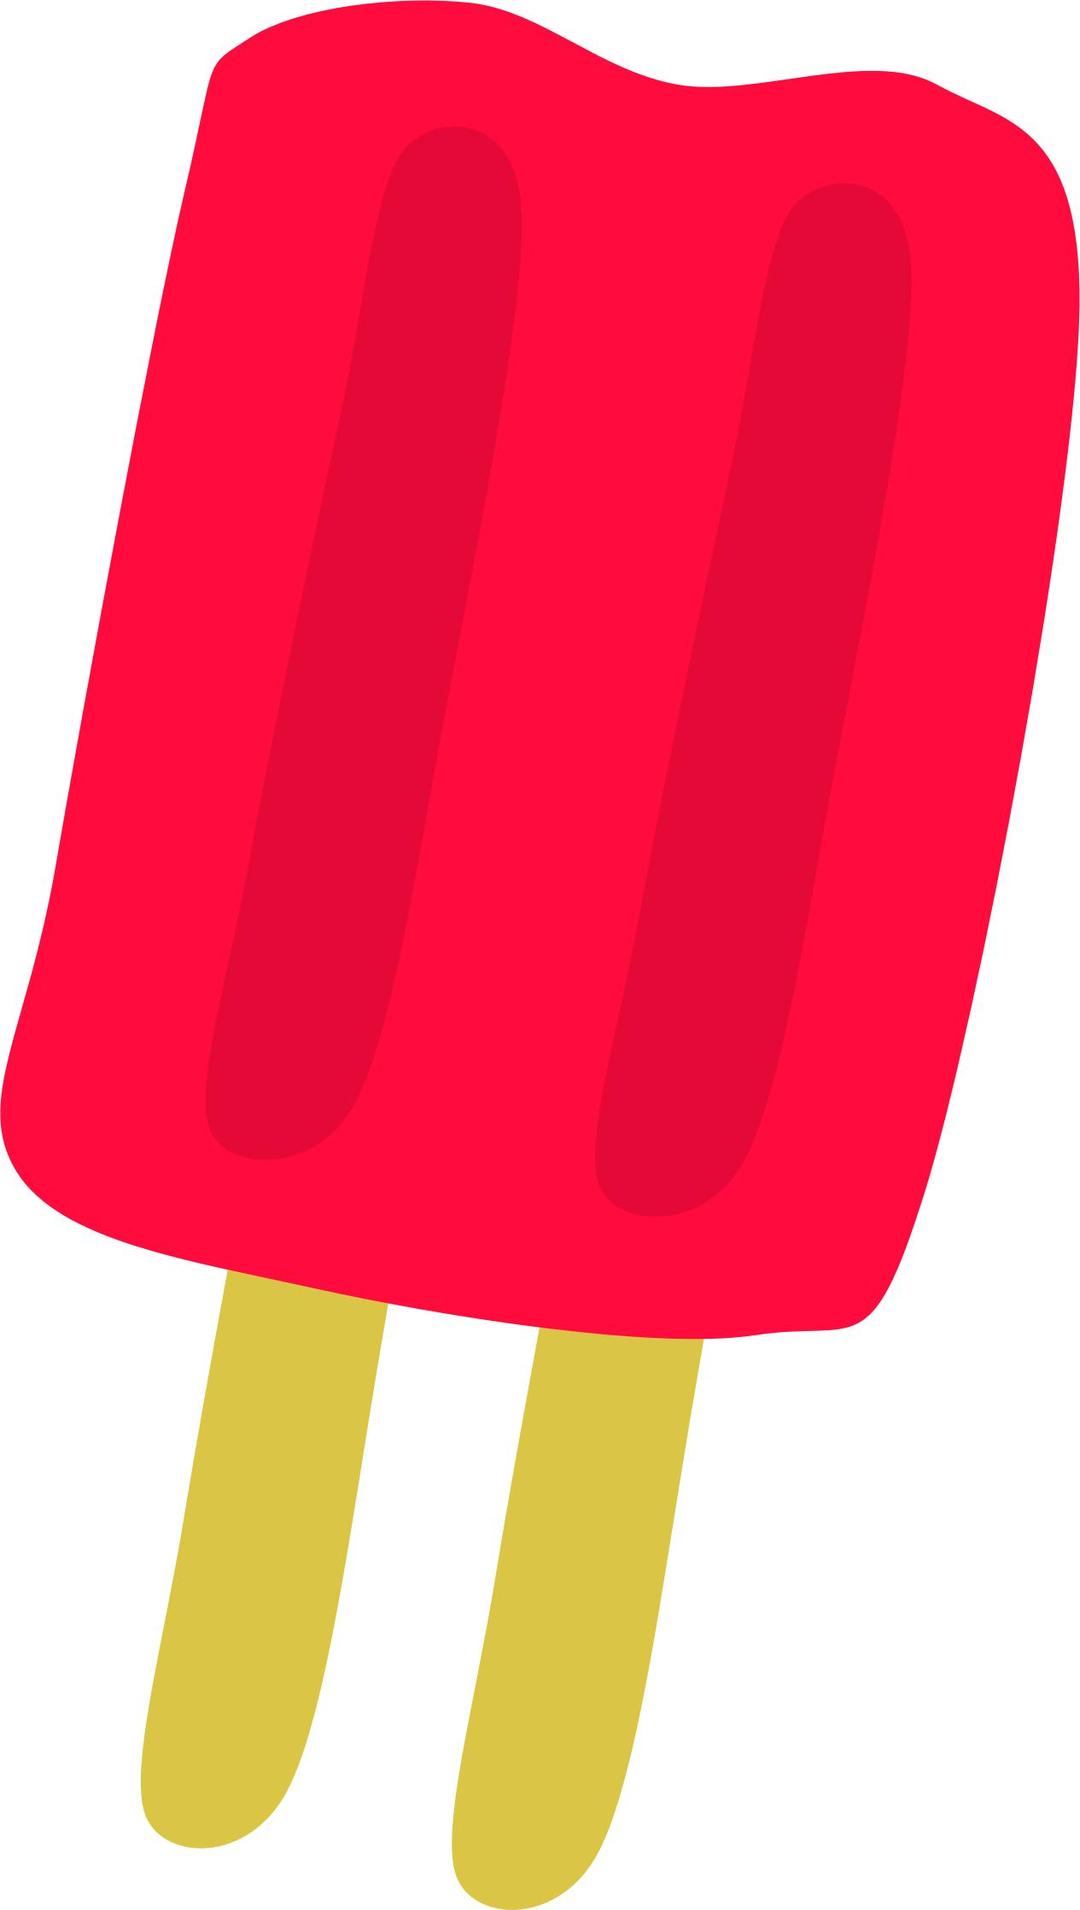 Red Popsicle png transparent